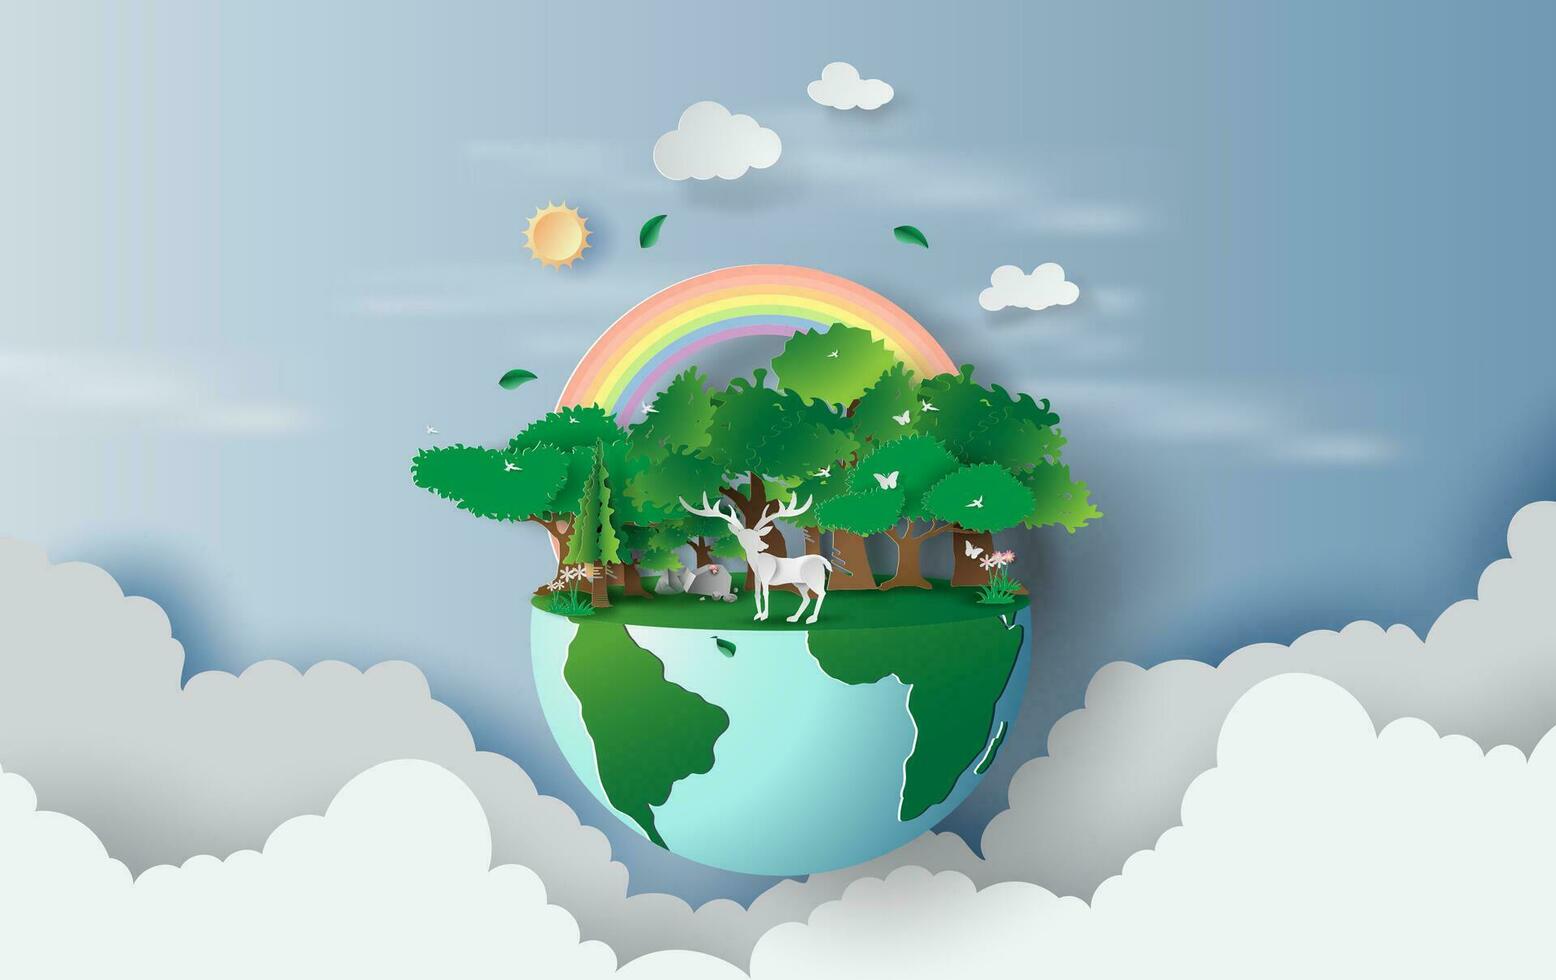 3D illustration of reindeer in green trees forest,Creative design world environment and earth day concept idea.landscape Wildlife with Deer in green nature plant by rainbow.paper cut and craft.vector vector